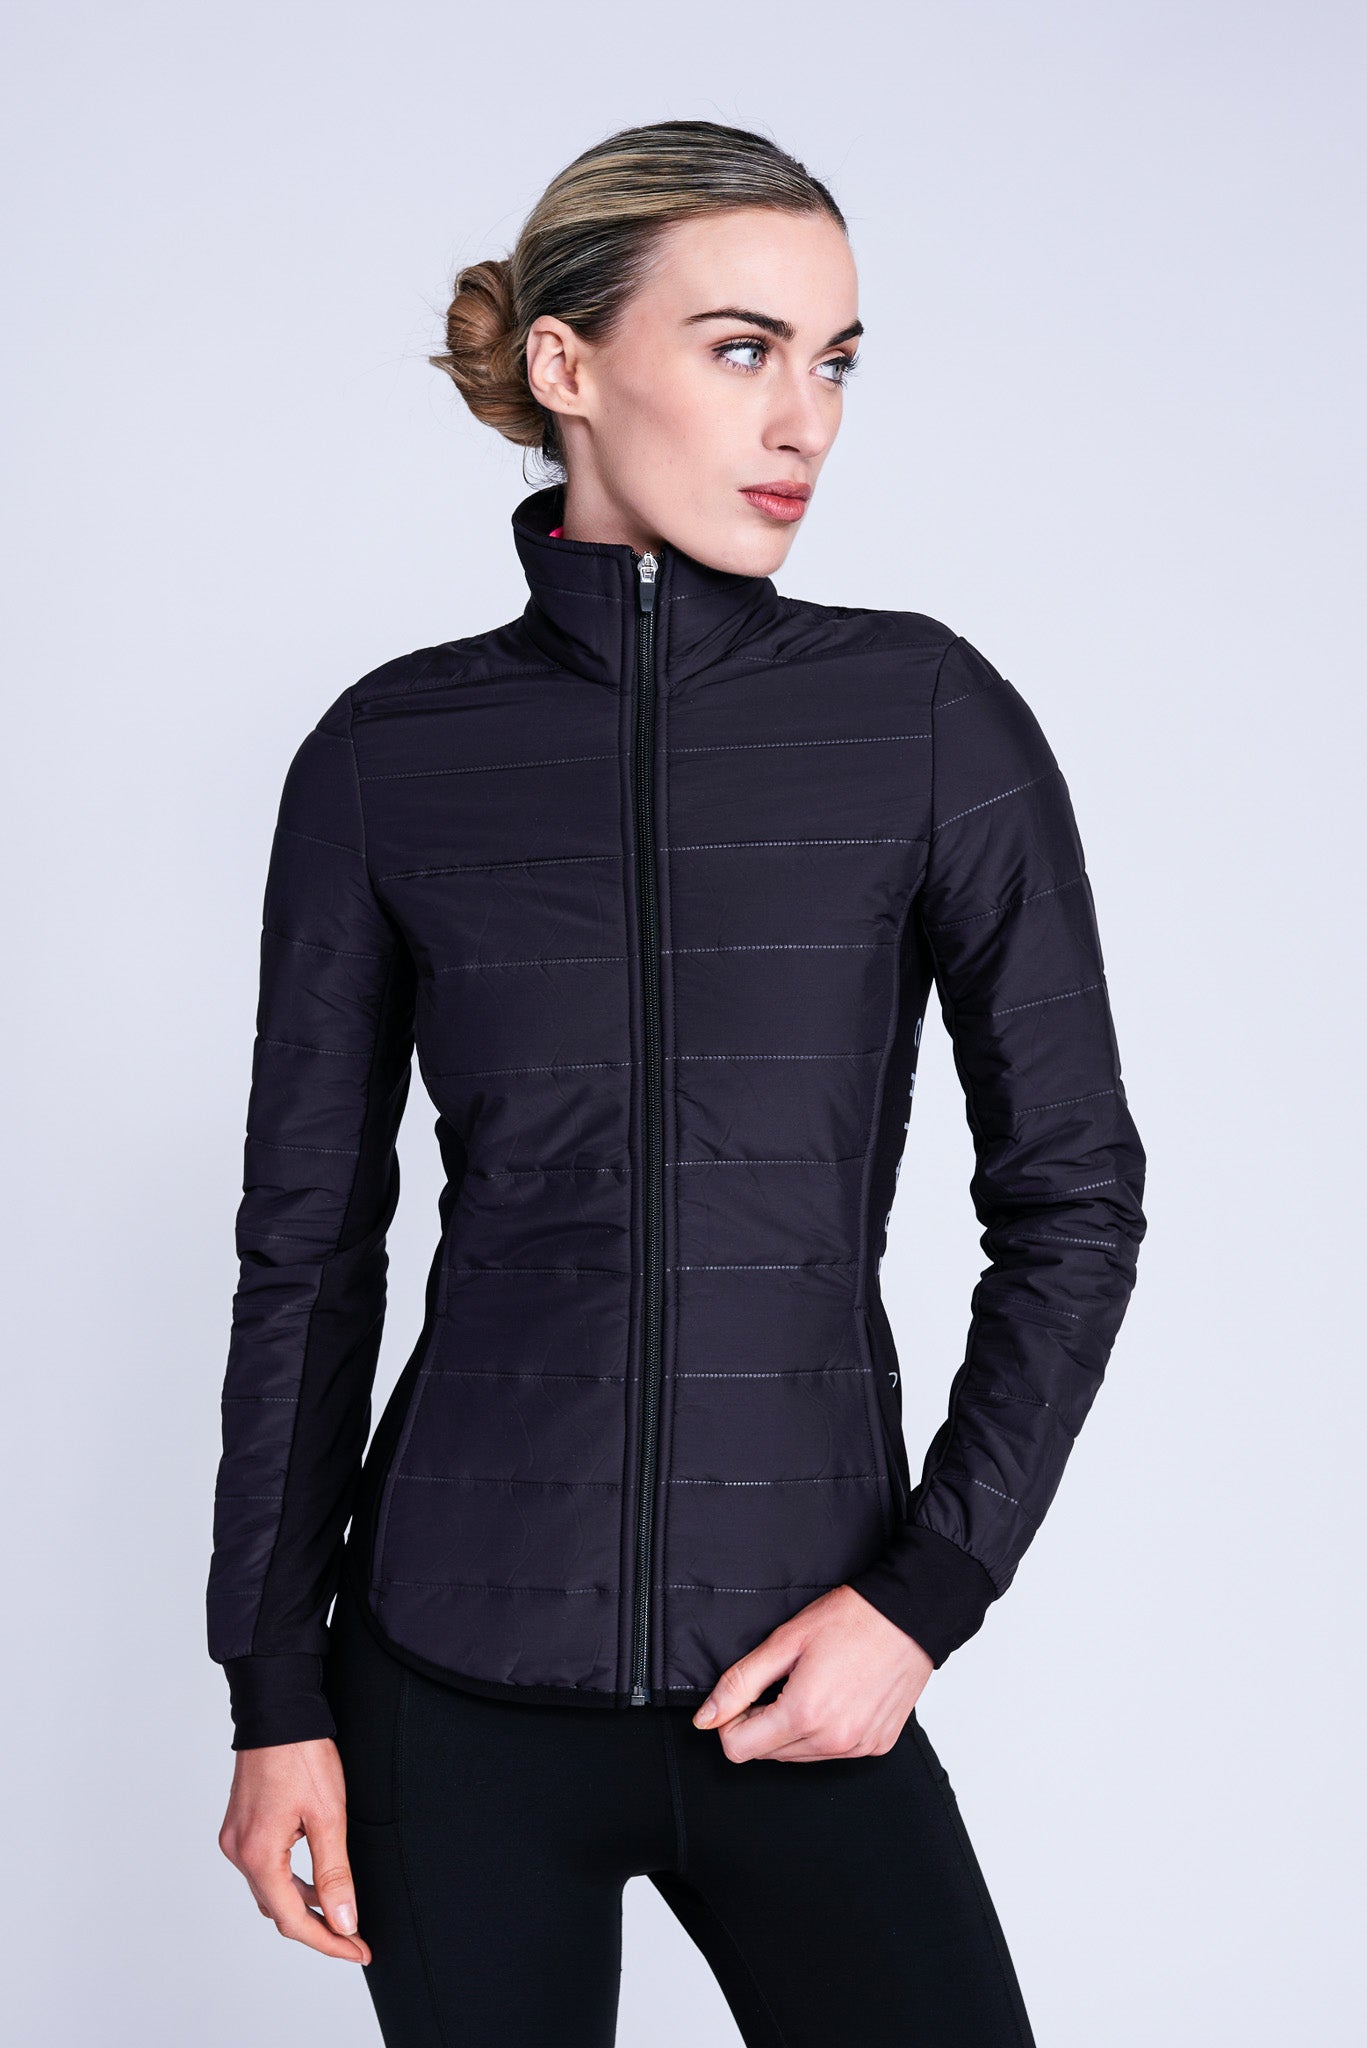 Chique Sport Train to Win Jacket Review 